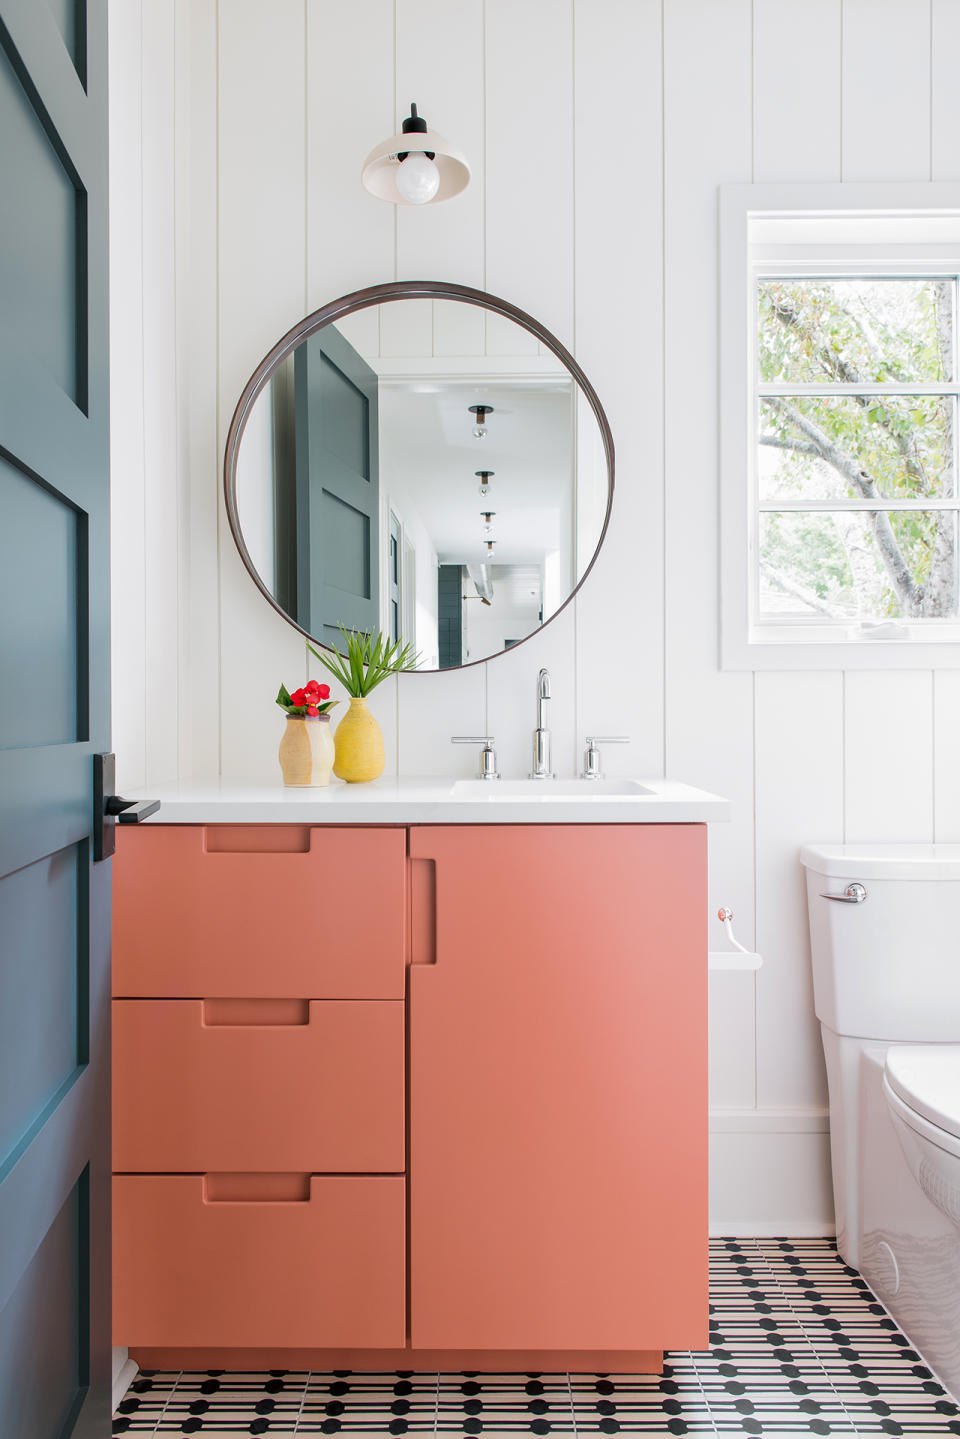 Use an Oversized Vanity in a Small Space